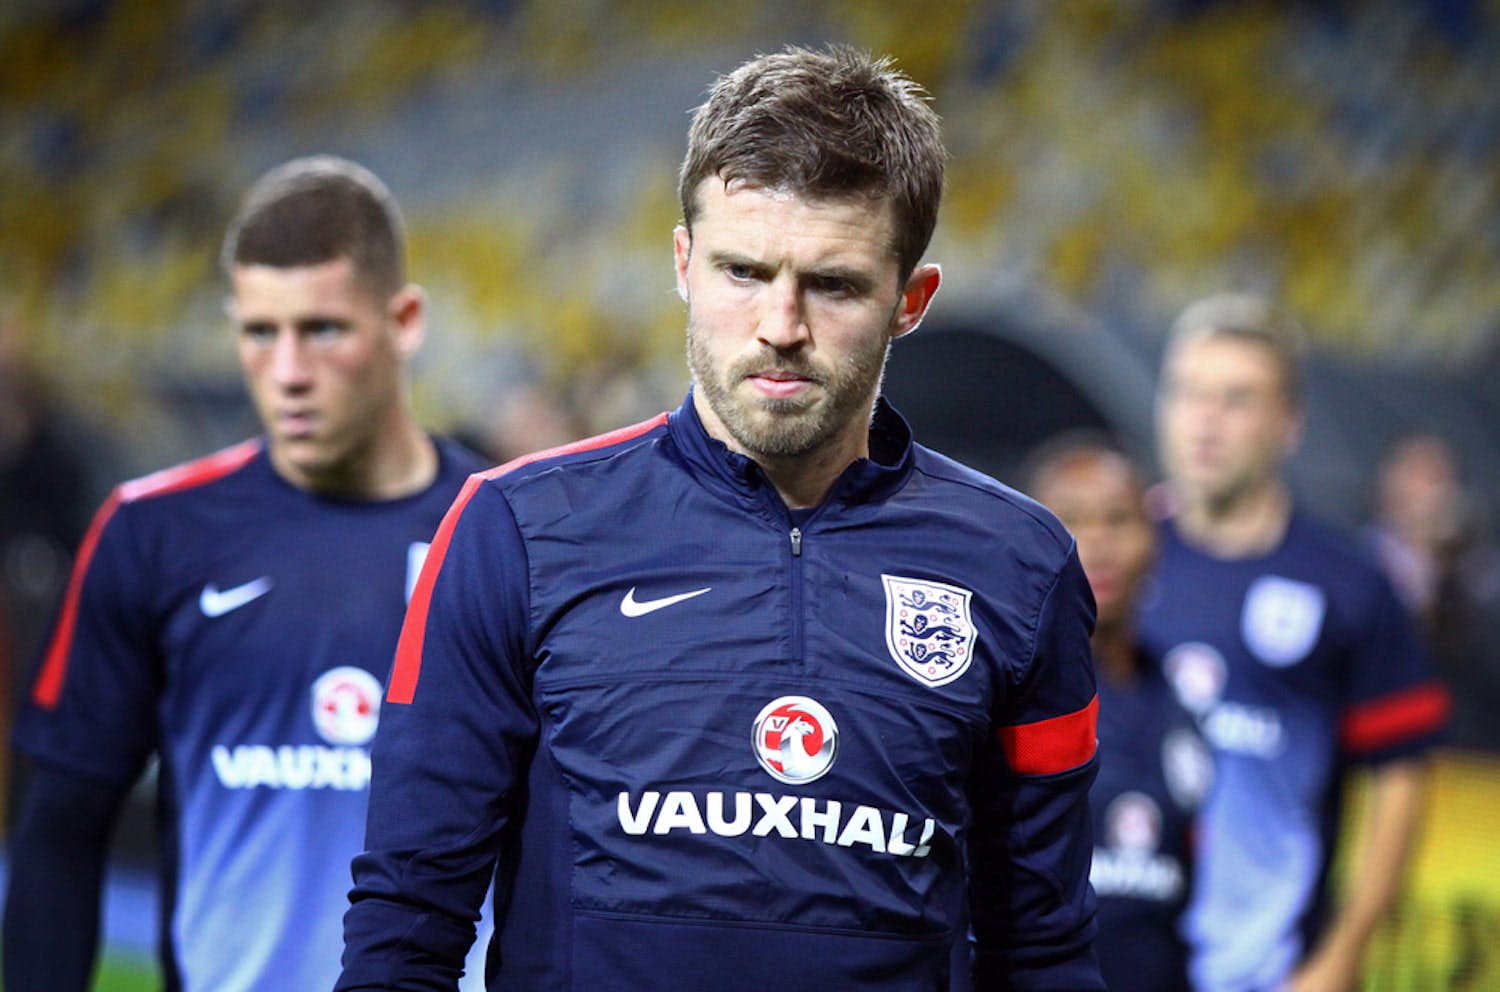 Michael Carrick Asked To Be Excused From England Squad For Impact On Mental Health